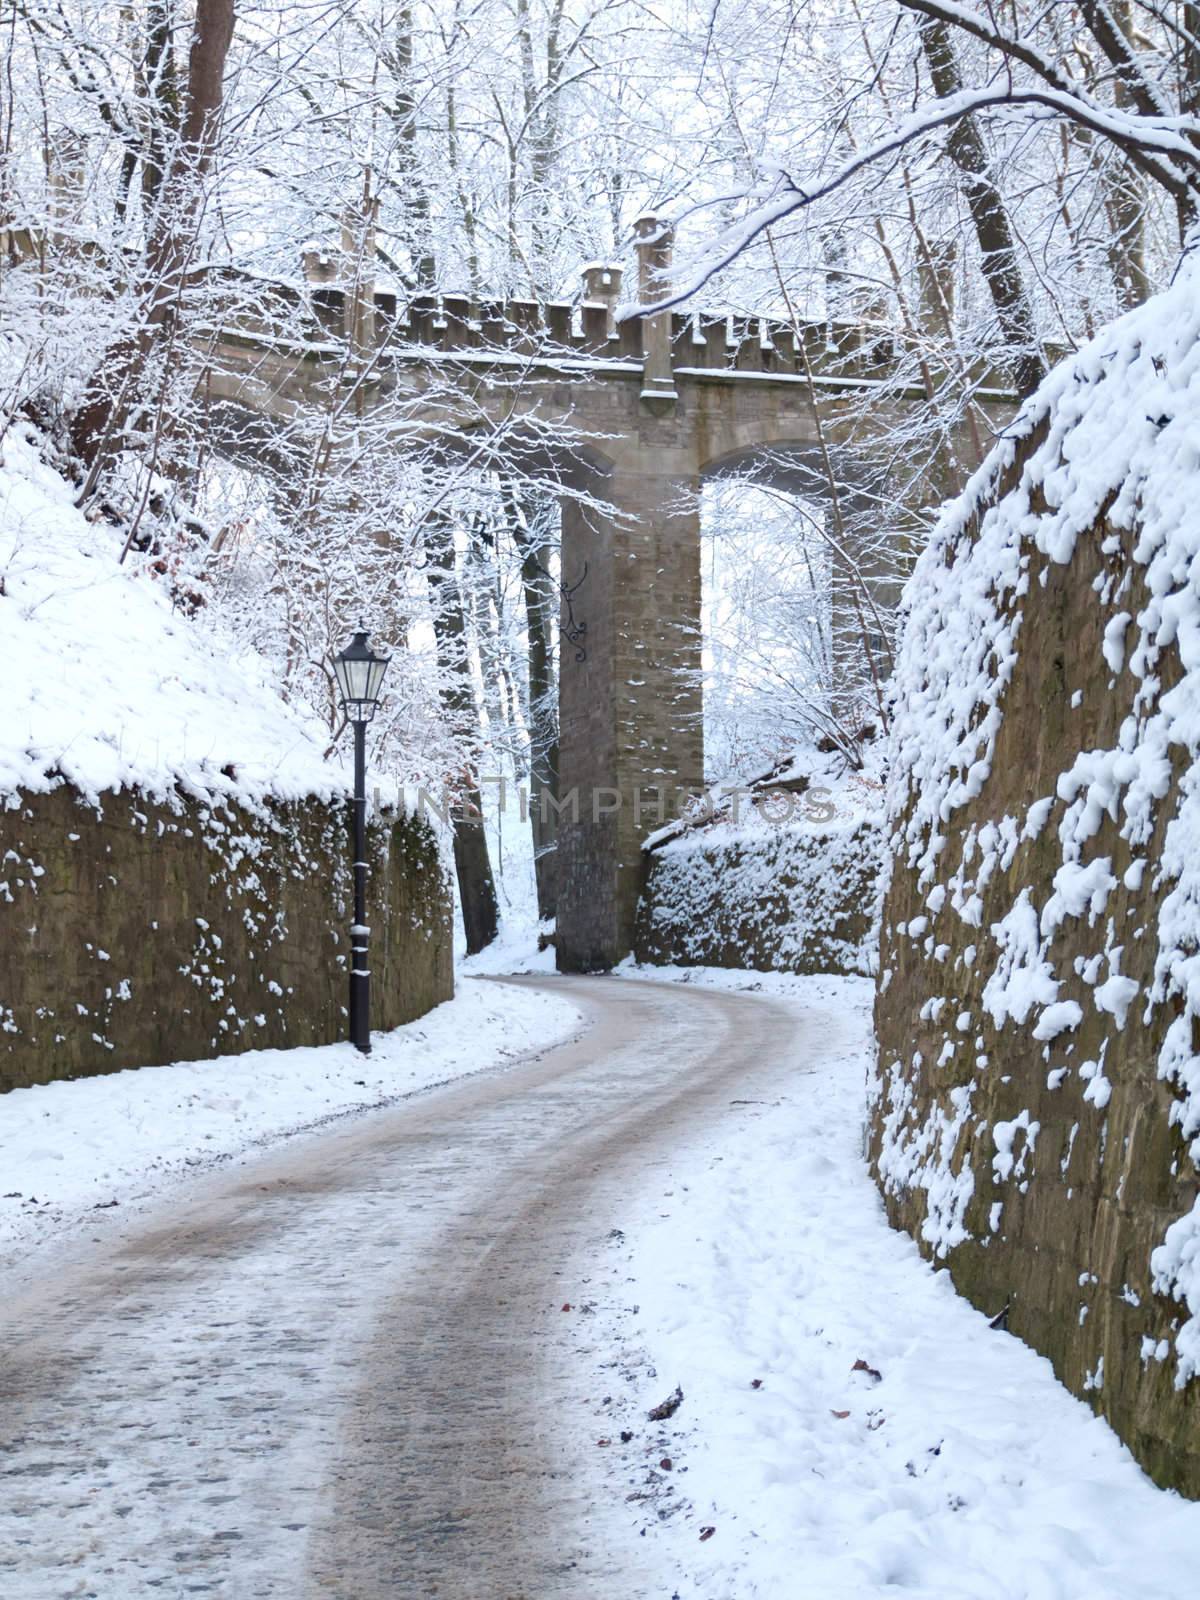 image of snowy Bridle Path